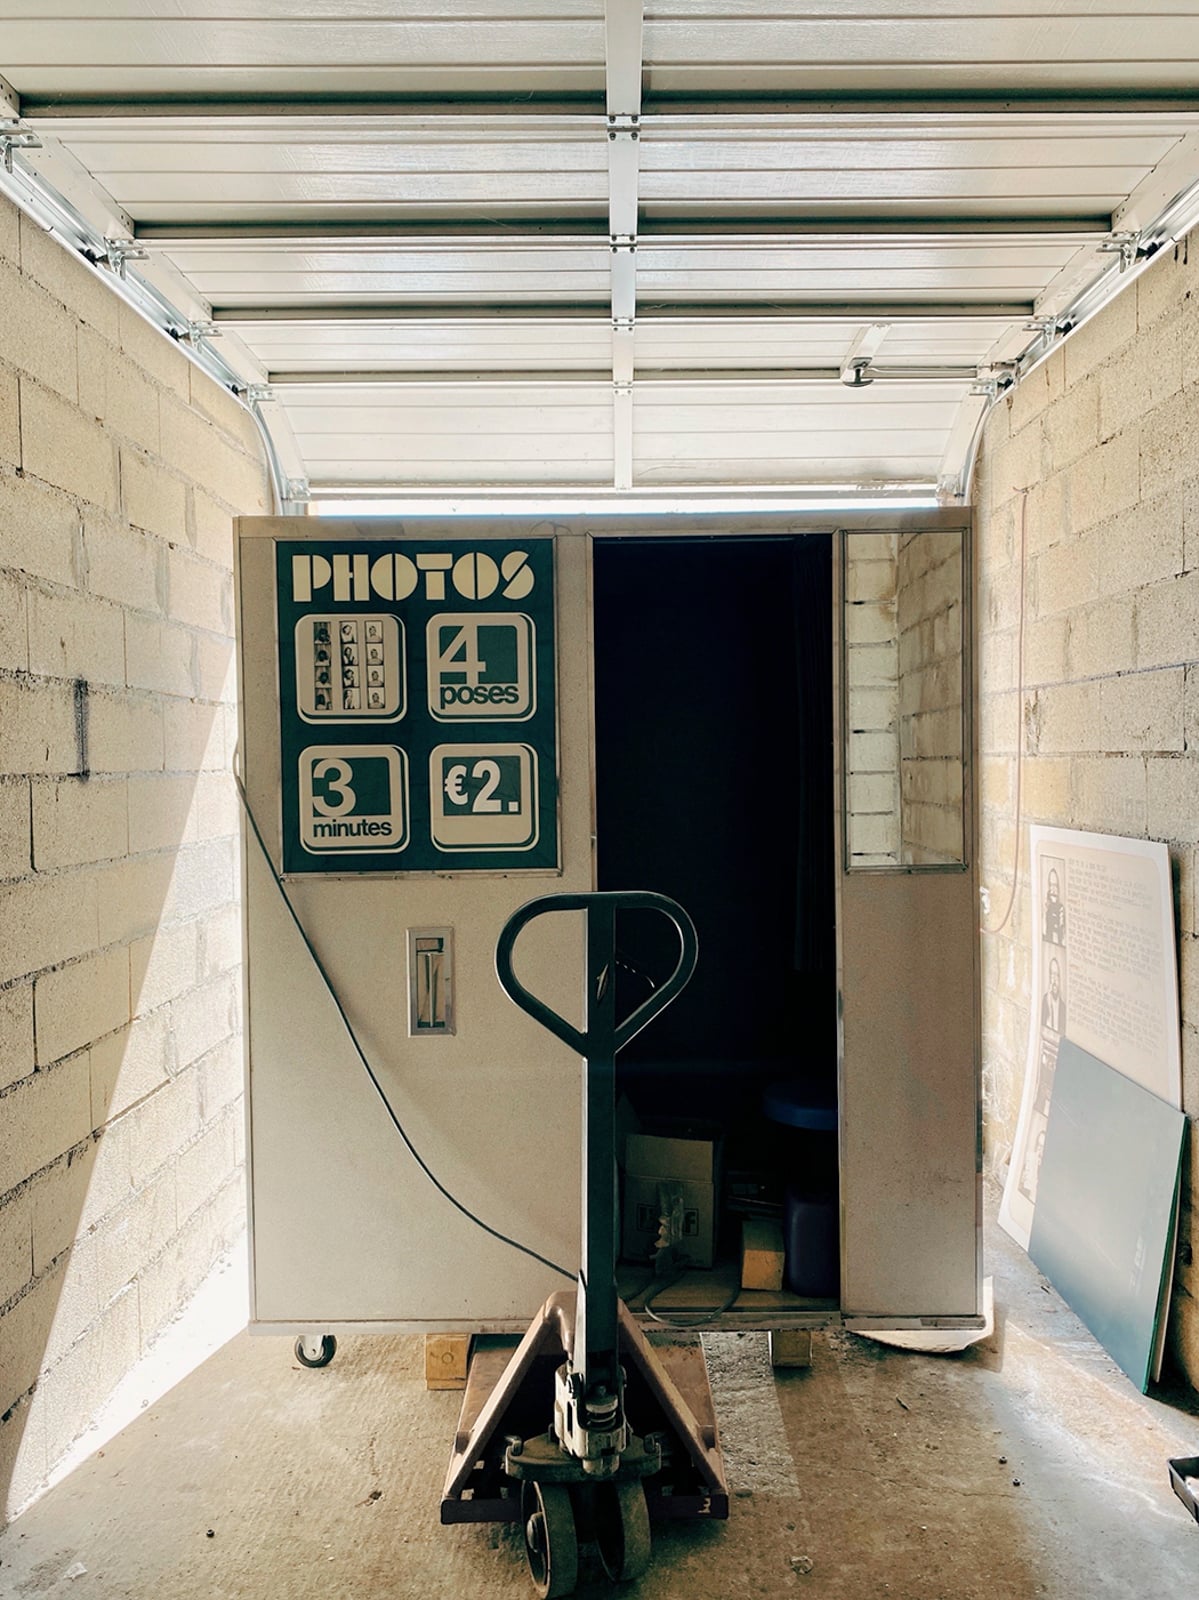 photo booth on a pallet truck